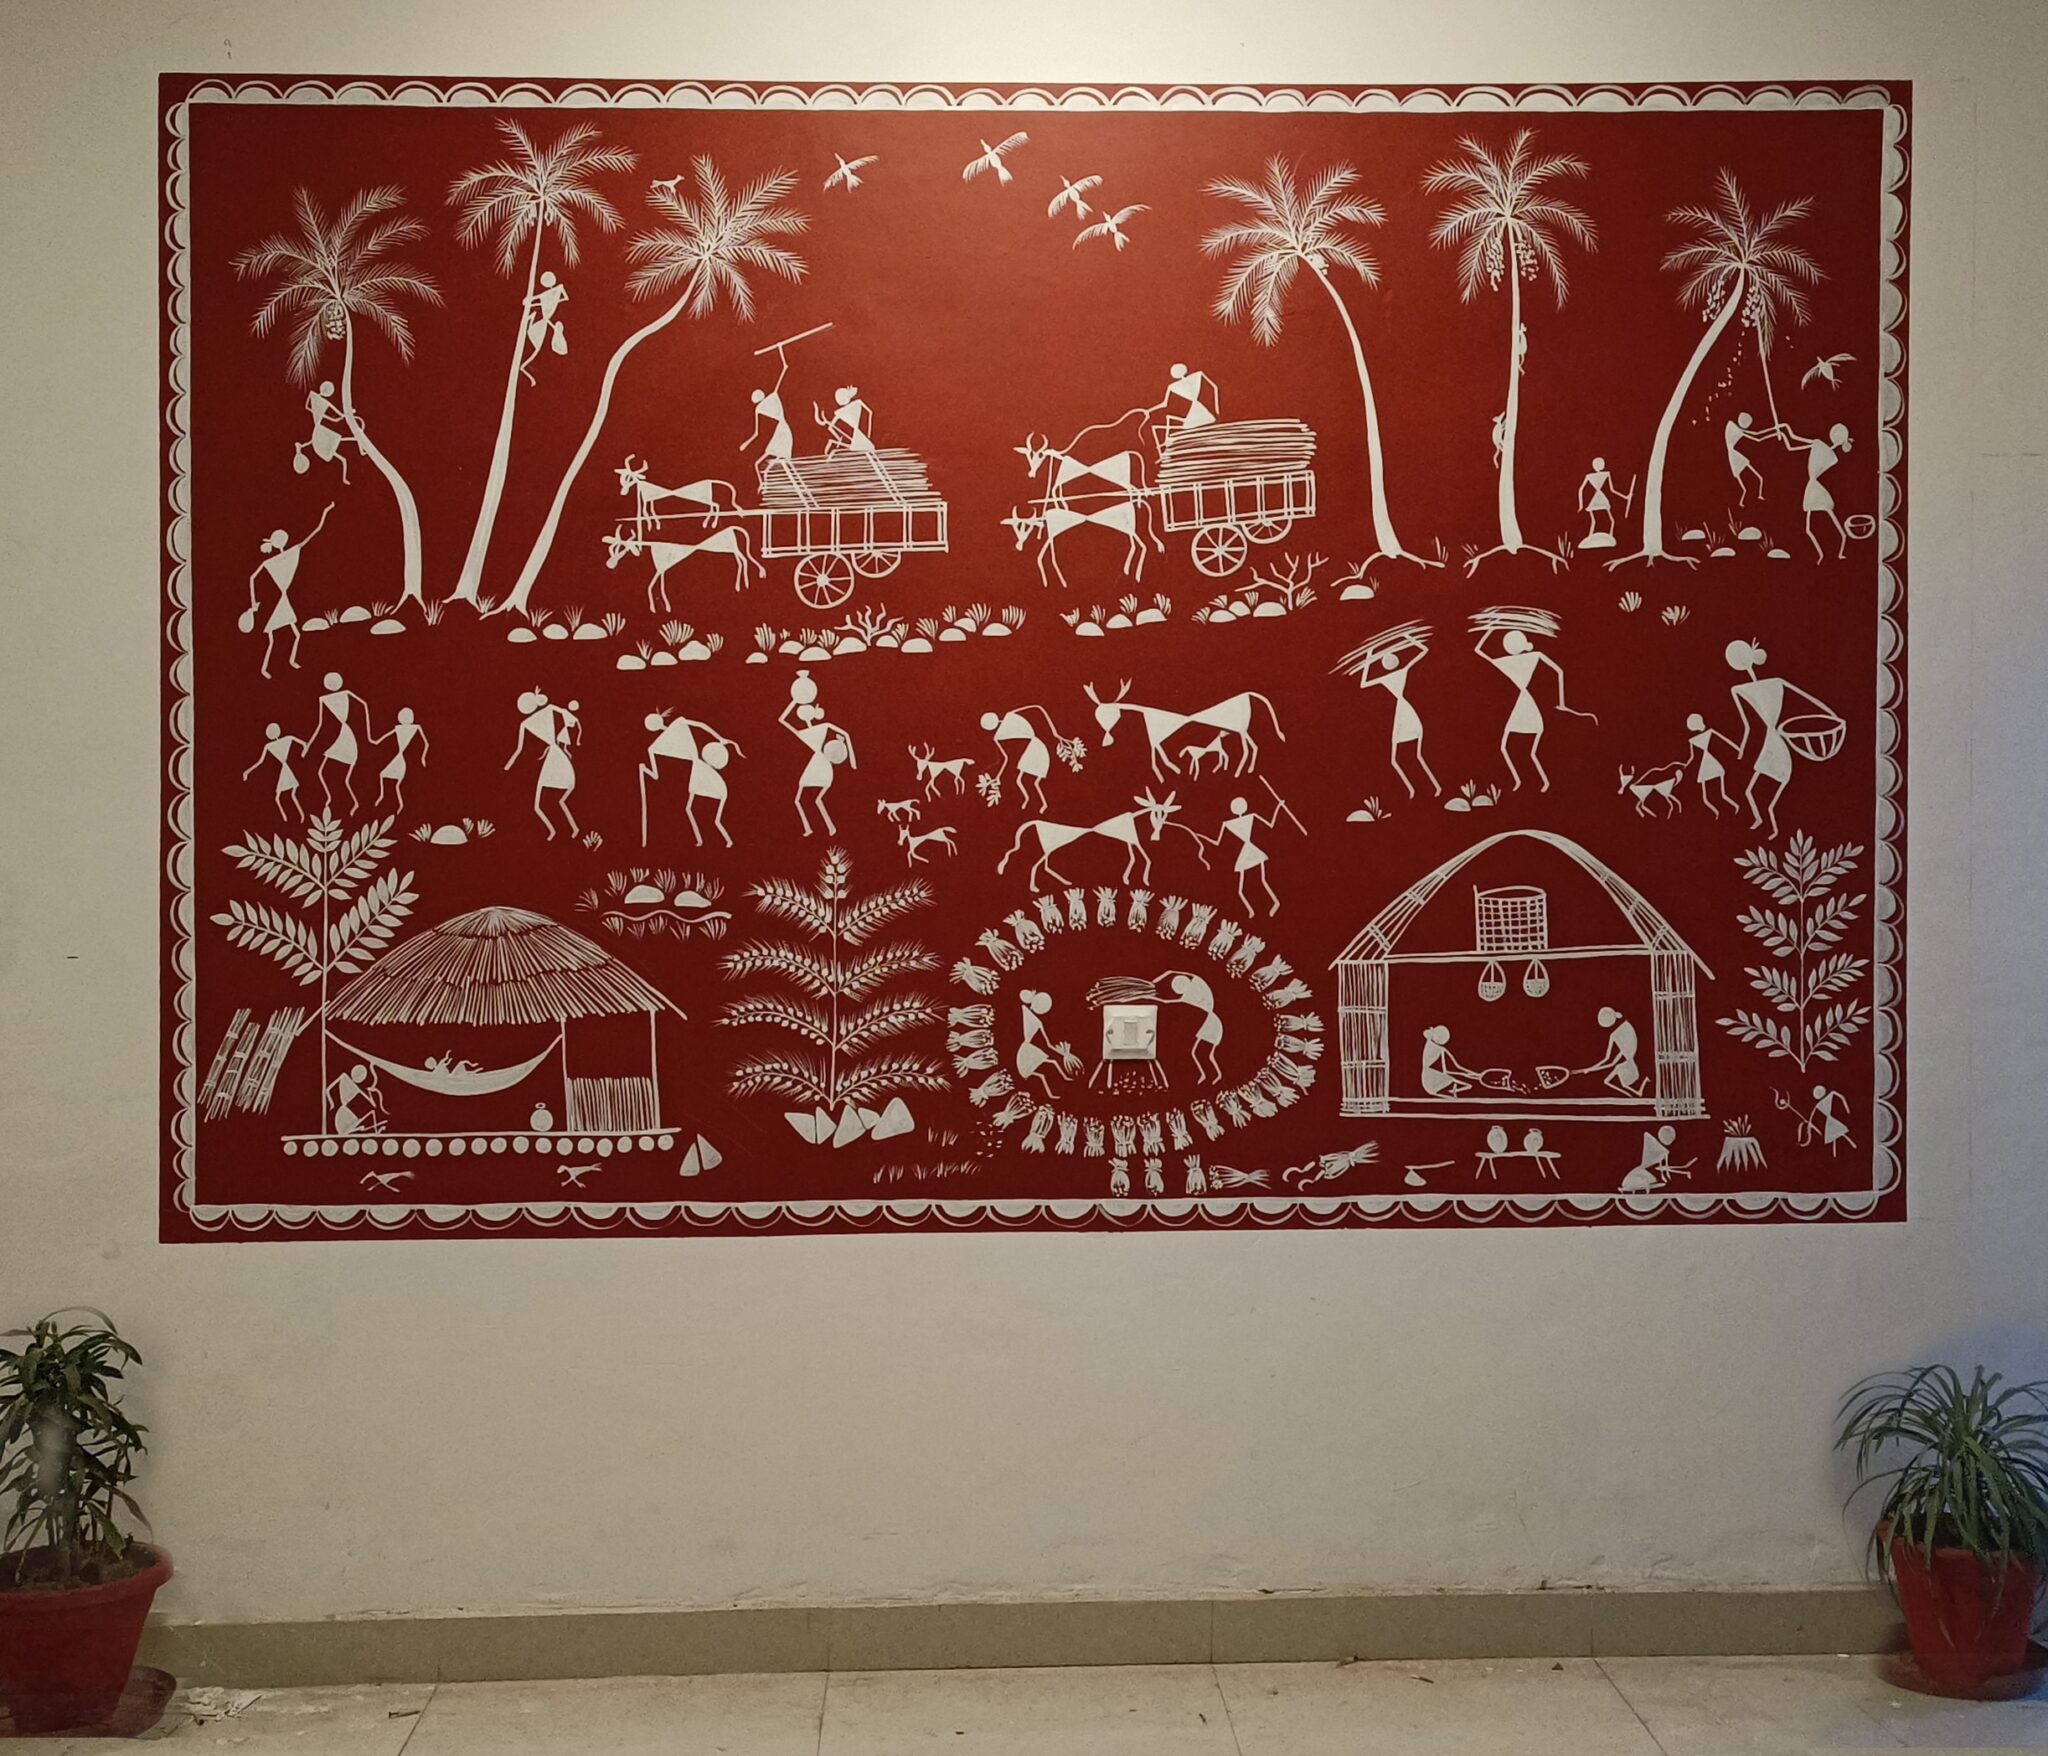 Warli painting Artist in Delhi NCR and Gurugram, Warli painting Artist, Traditinal warli wall painting artist in Delhi NCR and Gurugram